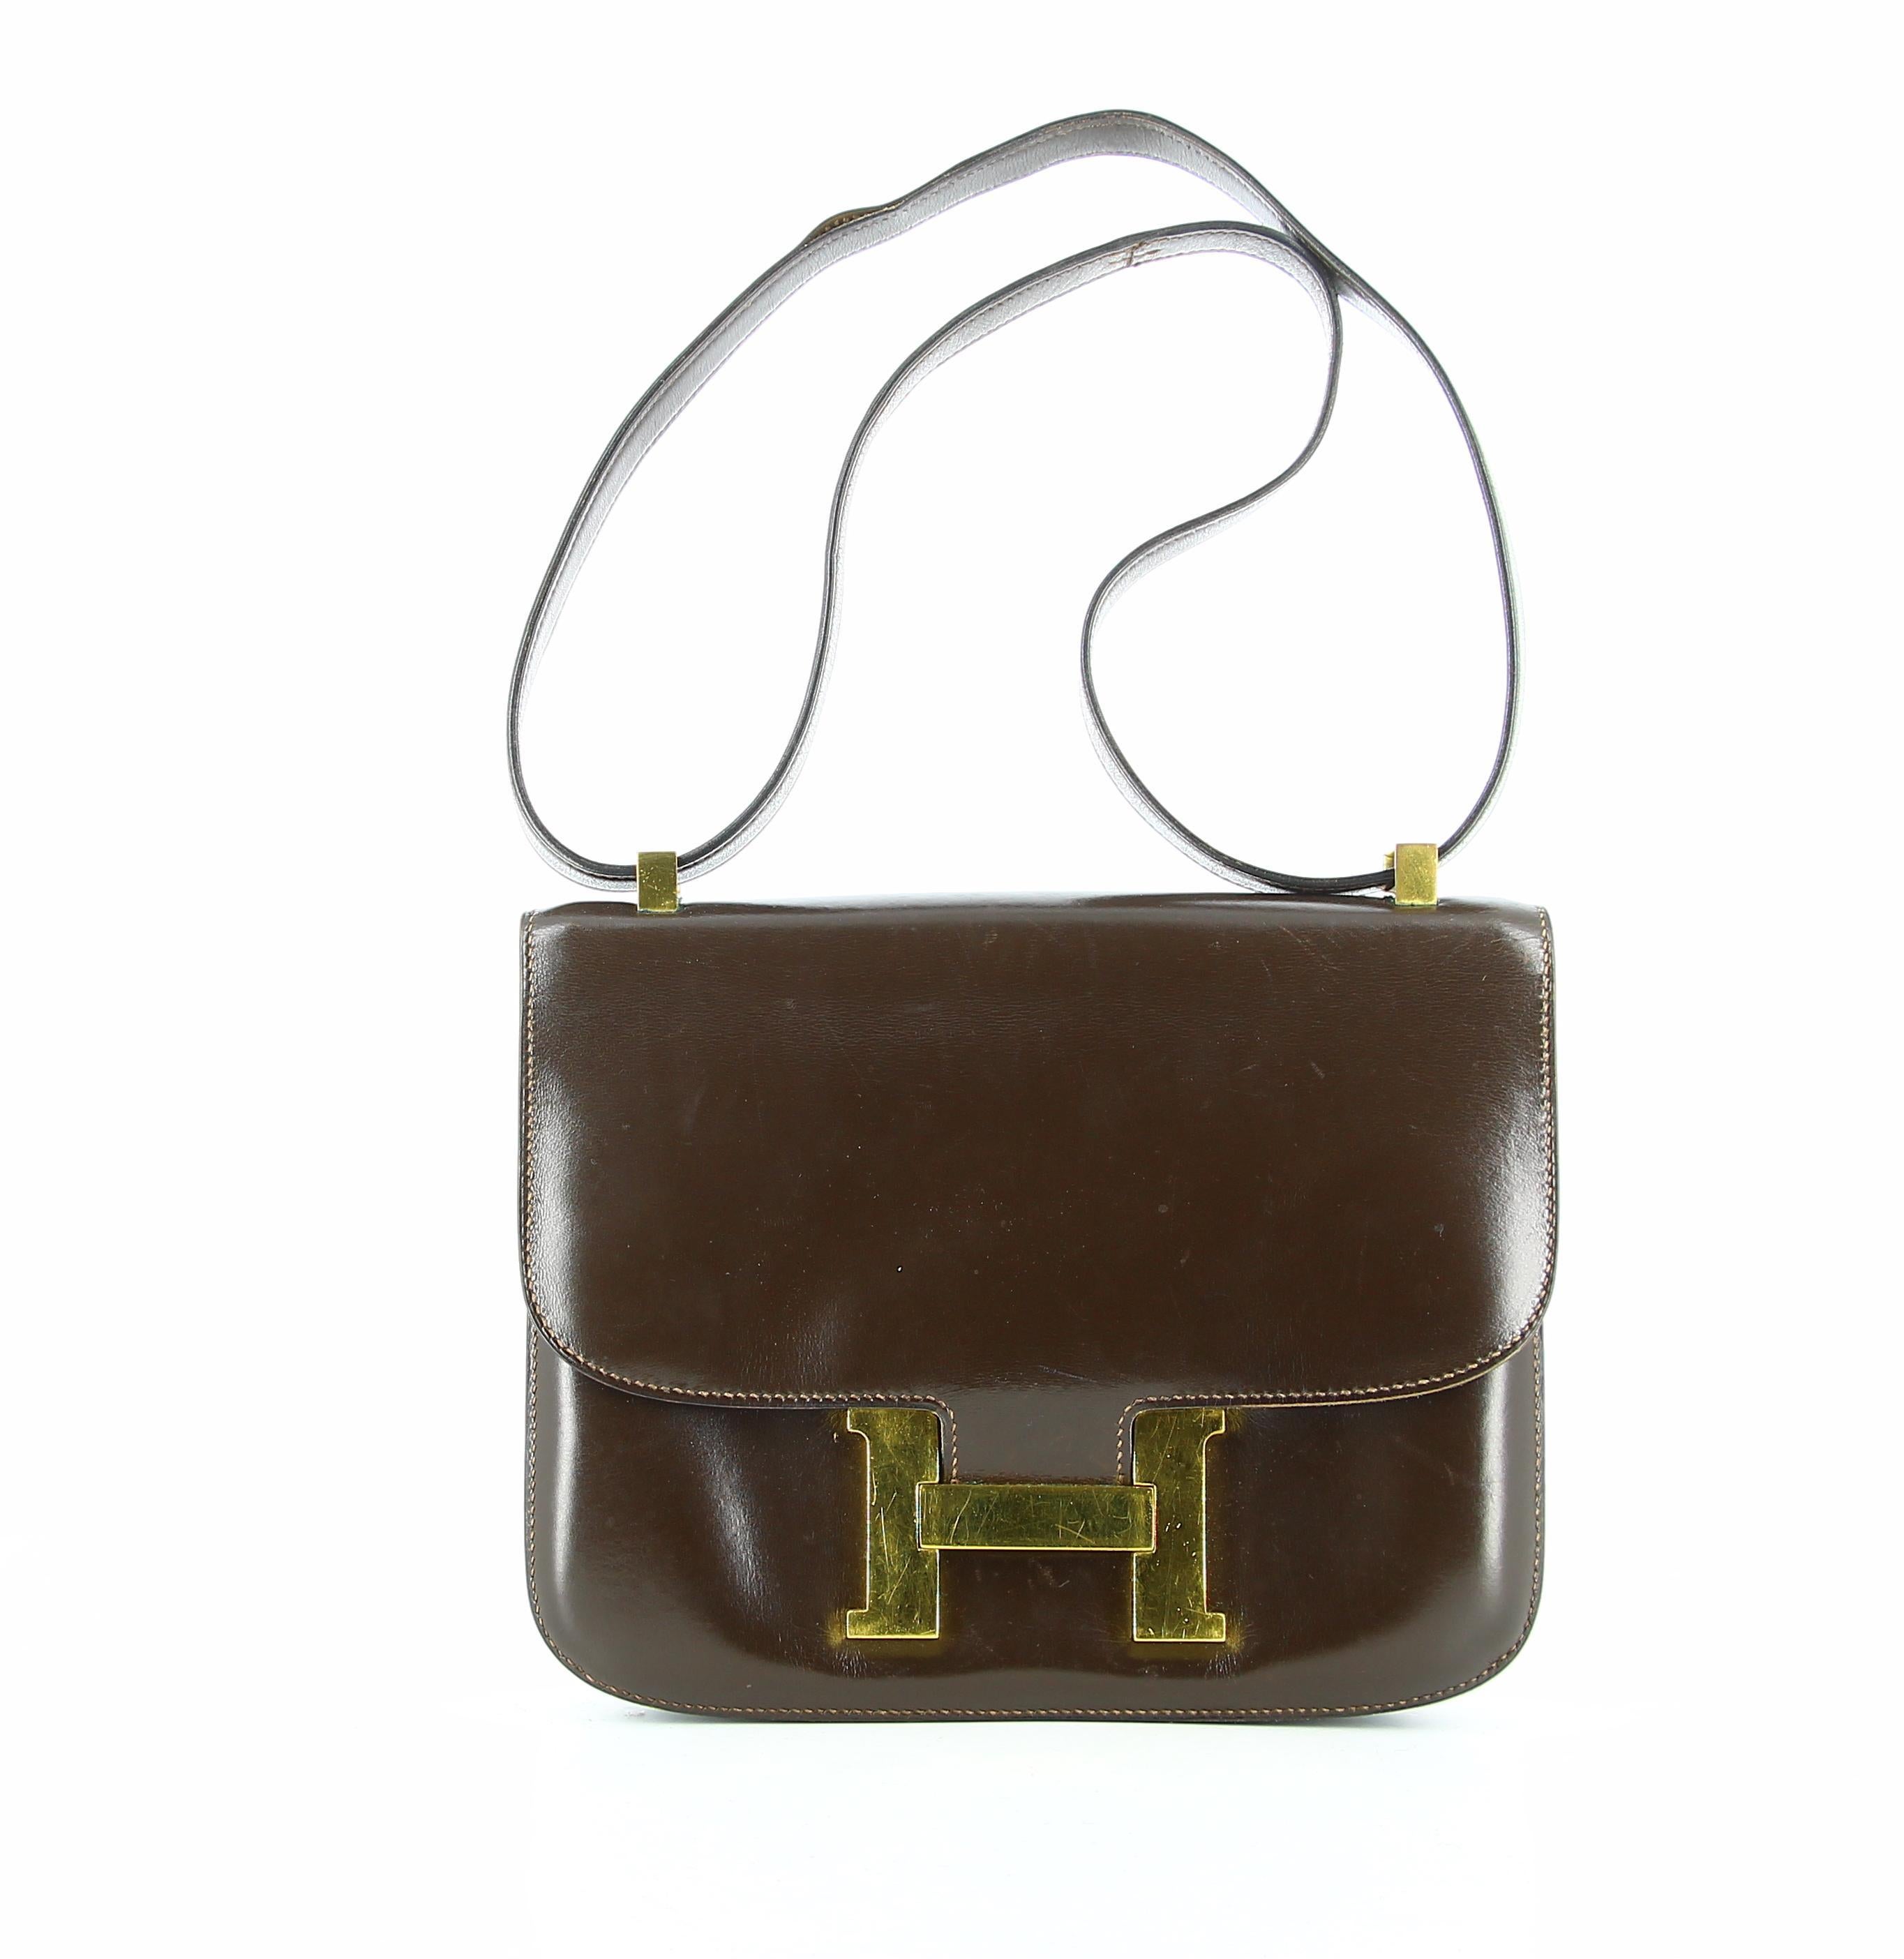 1960's Hermes Constance Brown Shoulder Bag
Good condition, shows slight signs of wear that have appeared over time.
This Hermes Constance bag, smooth brown  box leather, few missing stitches in the shoulder strap ( please check 1st image) ,